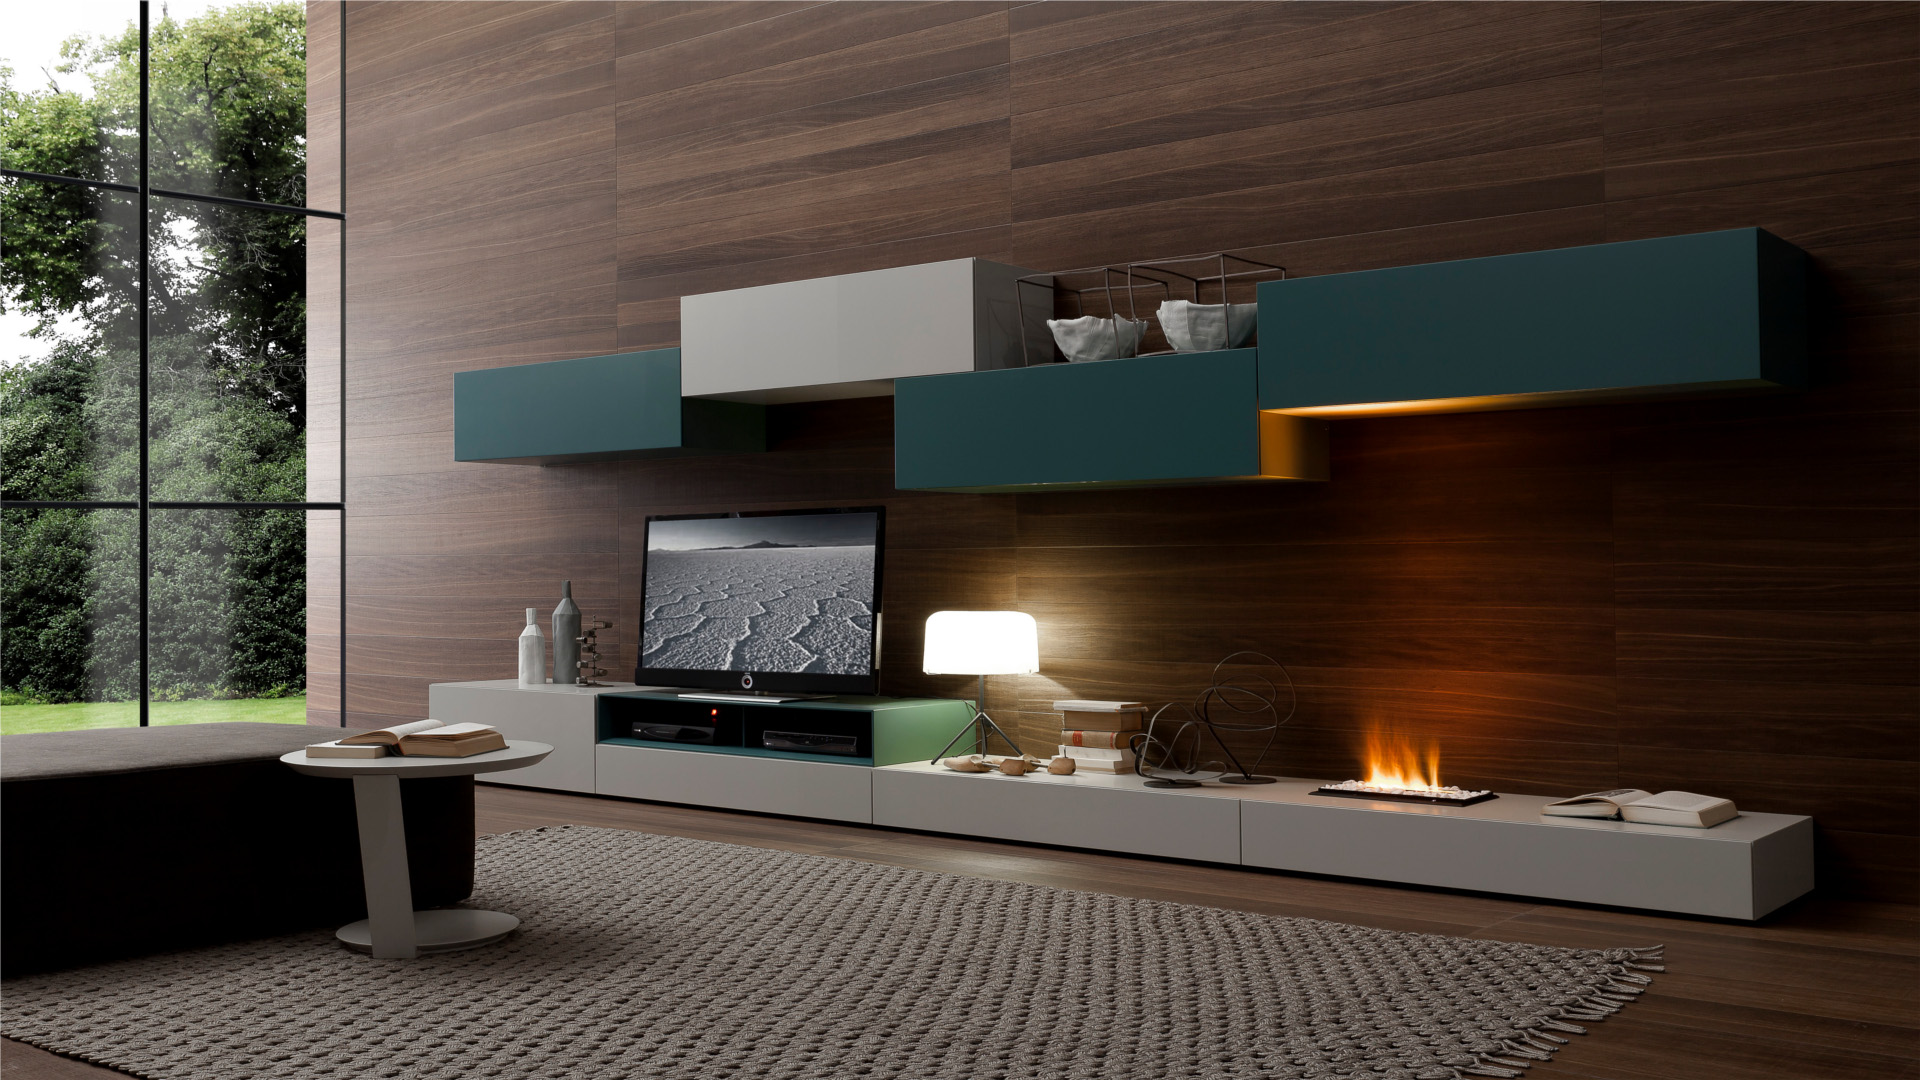 Modular systems in the living room for a beautiful decor